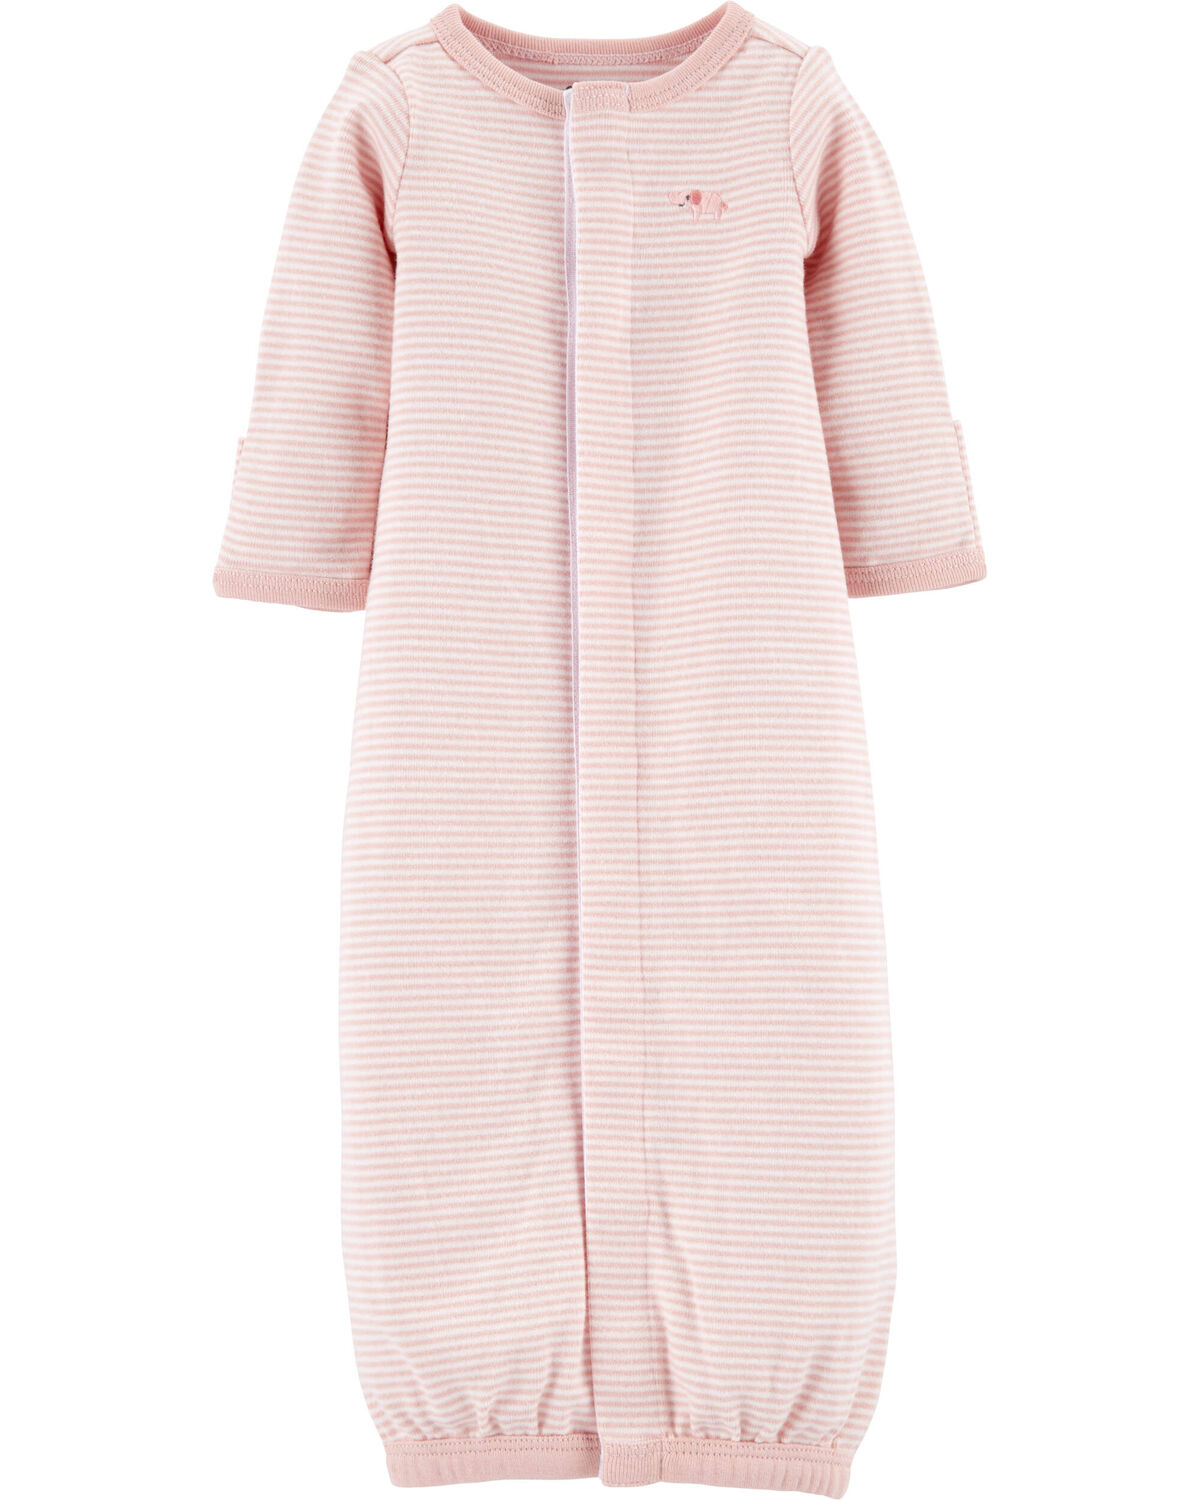 Pink Baby Preemie Striped Cotton Sleeper Gown | carters.com